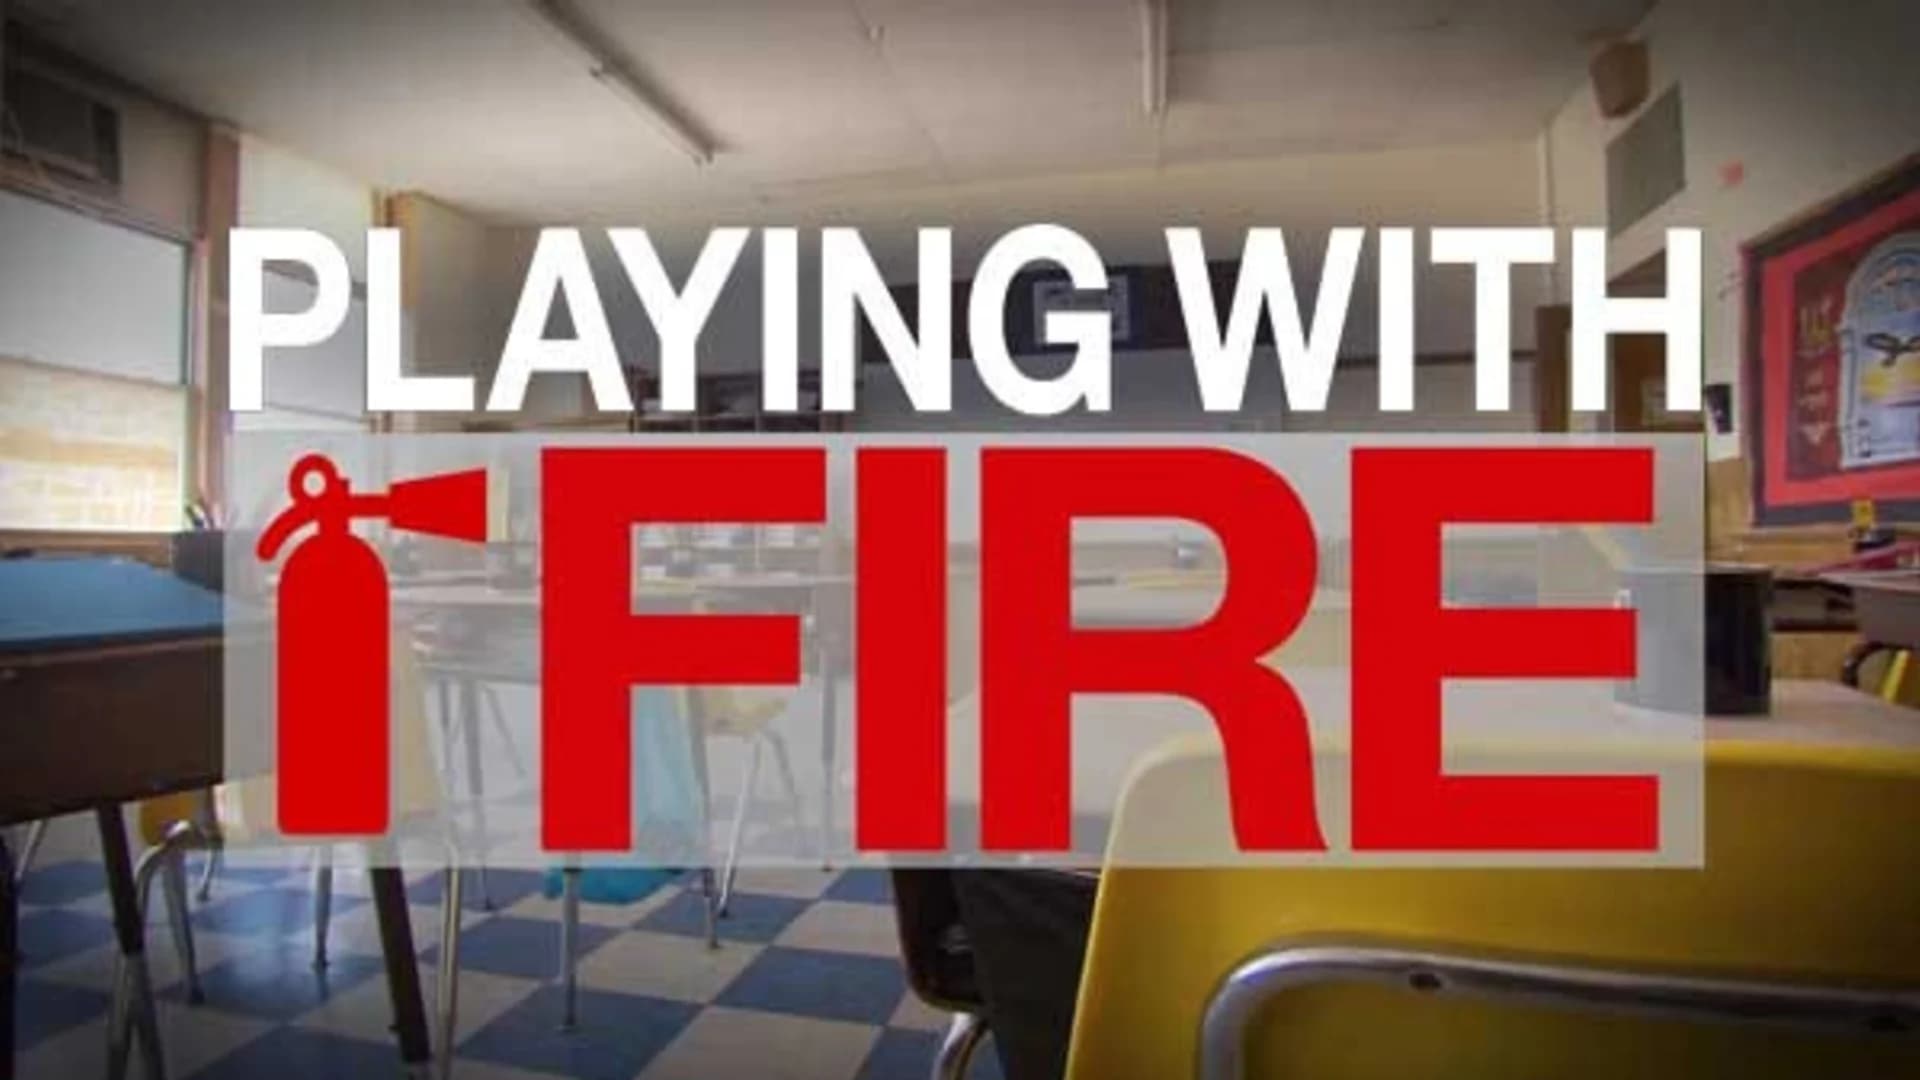 Playing With Fire: Private school safety report